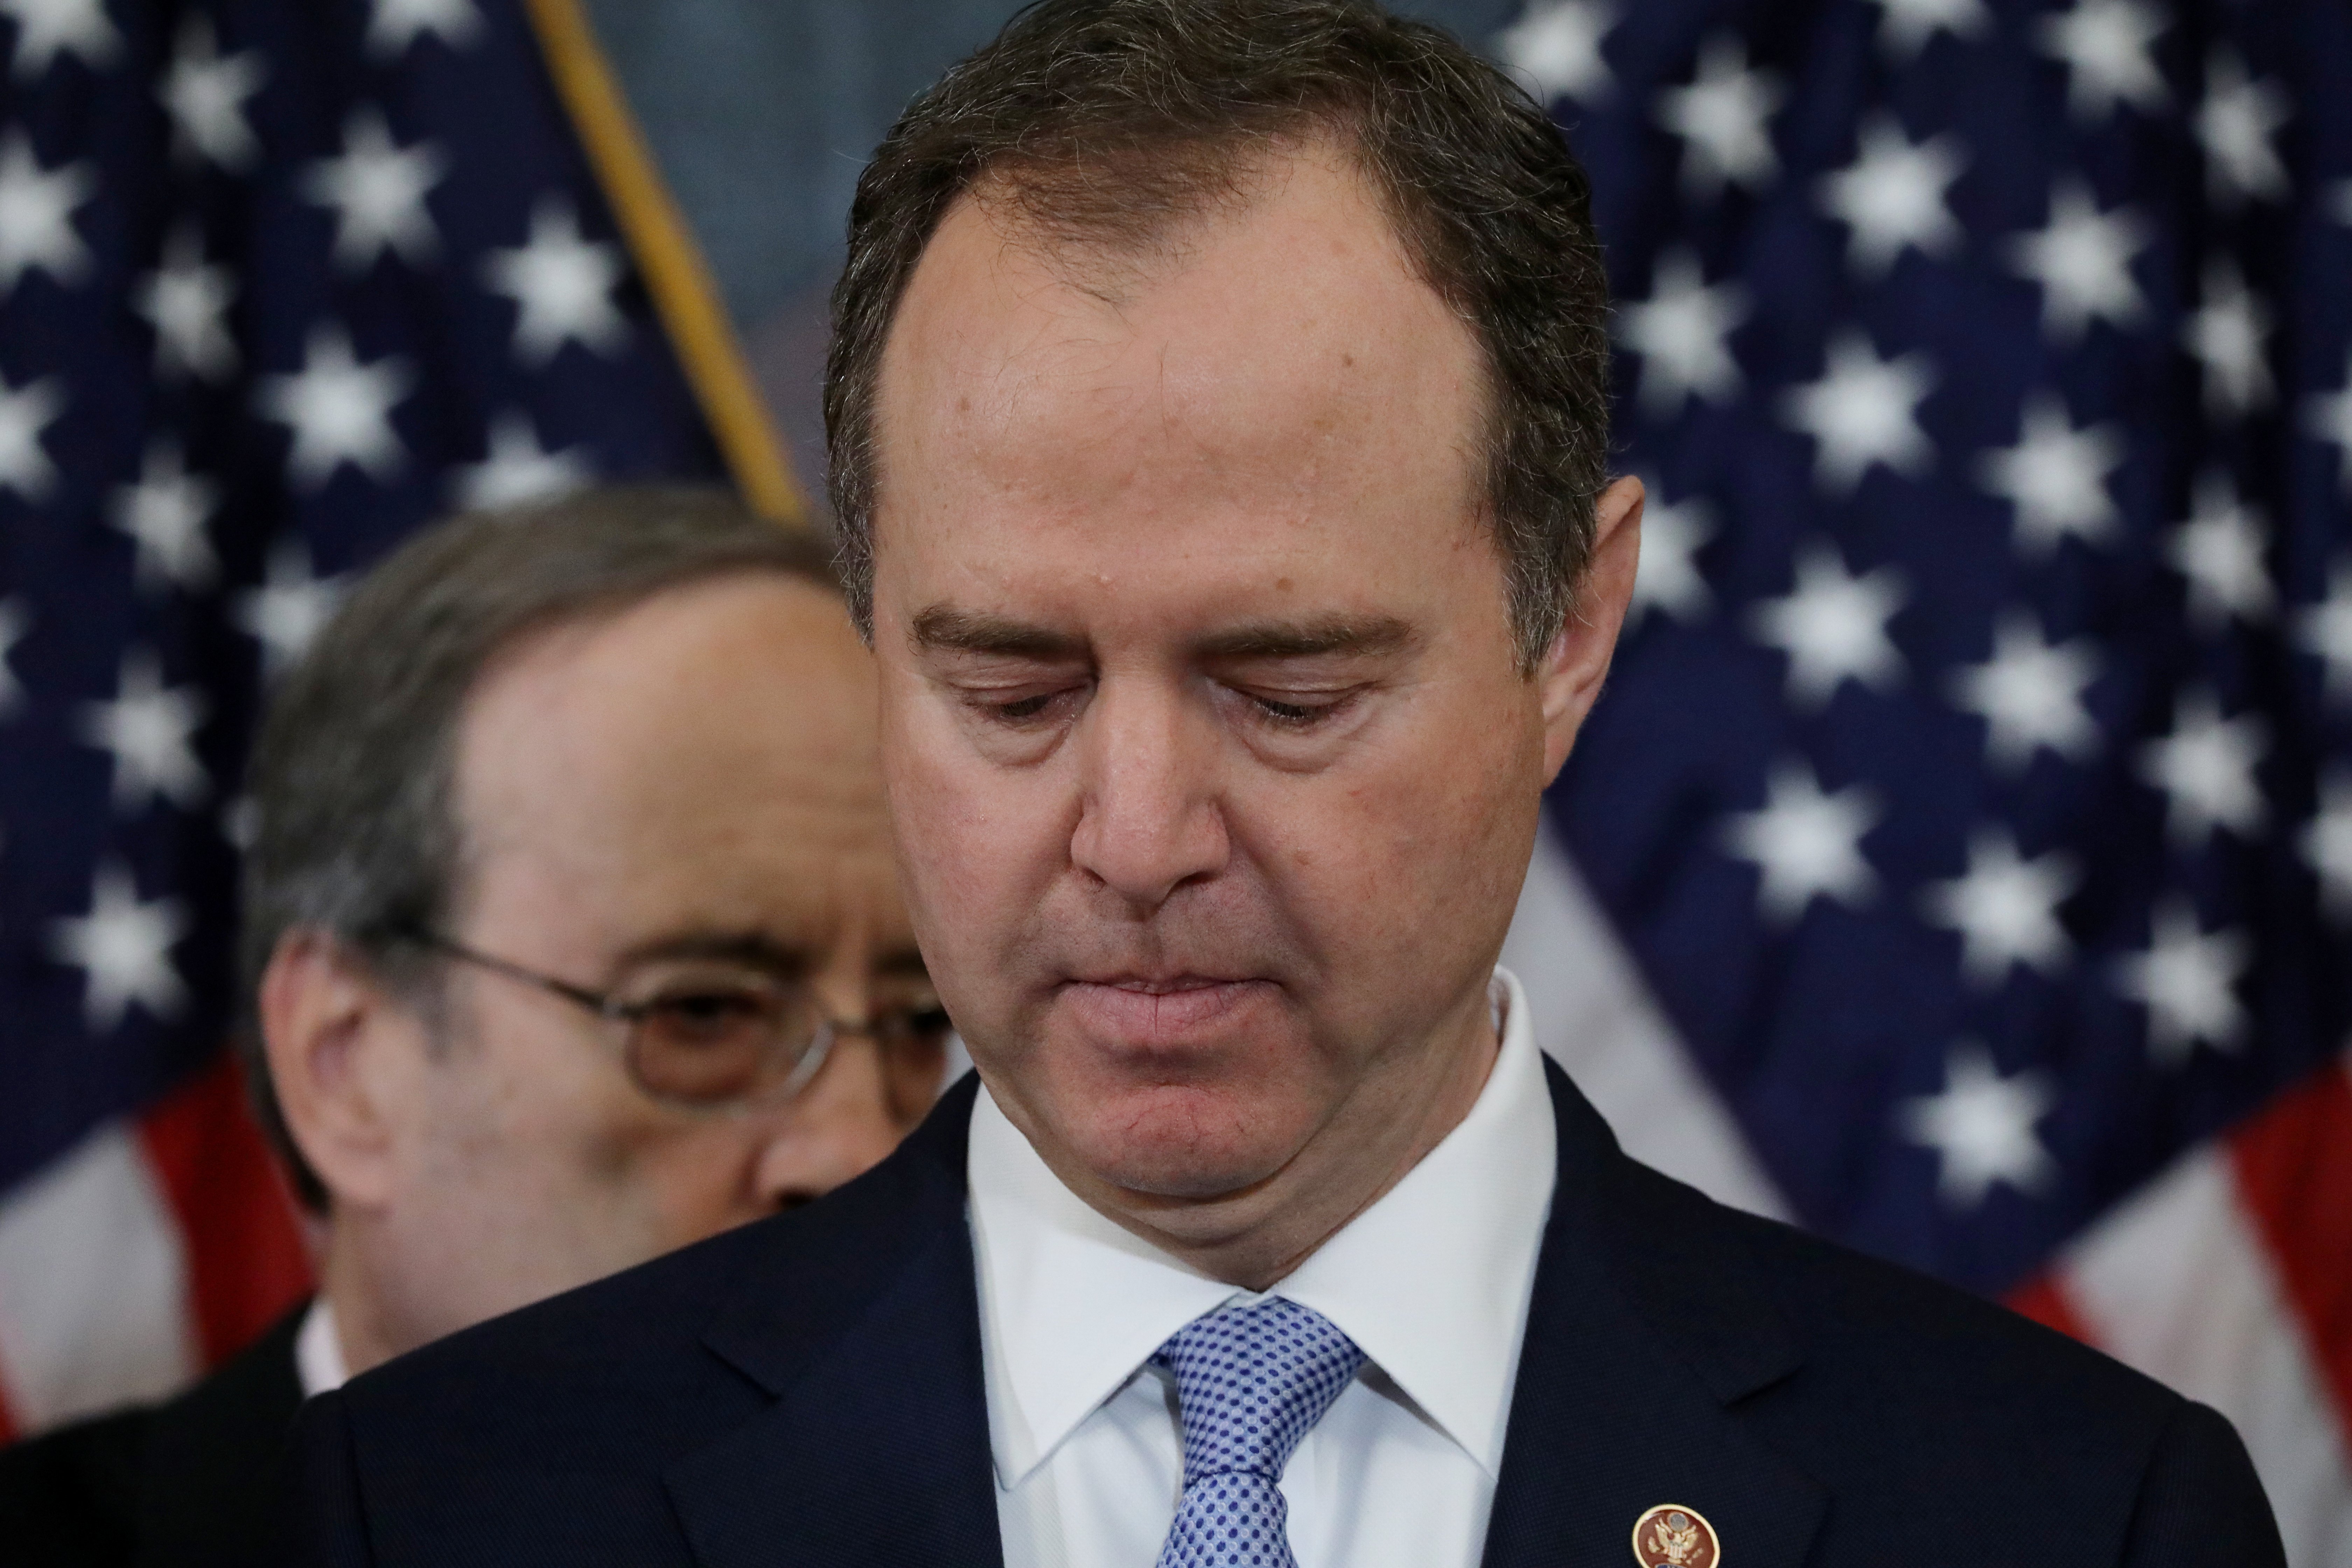 House Intelligence Chairman Adam Schiff (D-CA) pauses while speaking to reporters with House Foreign Affairs Chairman Eliot Engel (D-NY) and other House committee chairs during a news conference to announce articles of impeachment against U.S. President Donald Trump on Capitol Hill in Washington, U.S., Dec. 10, 2019. REUTERS/Jonathan Ernst 